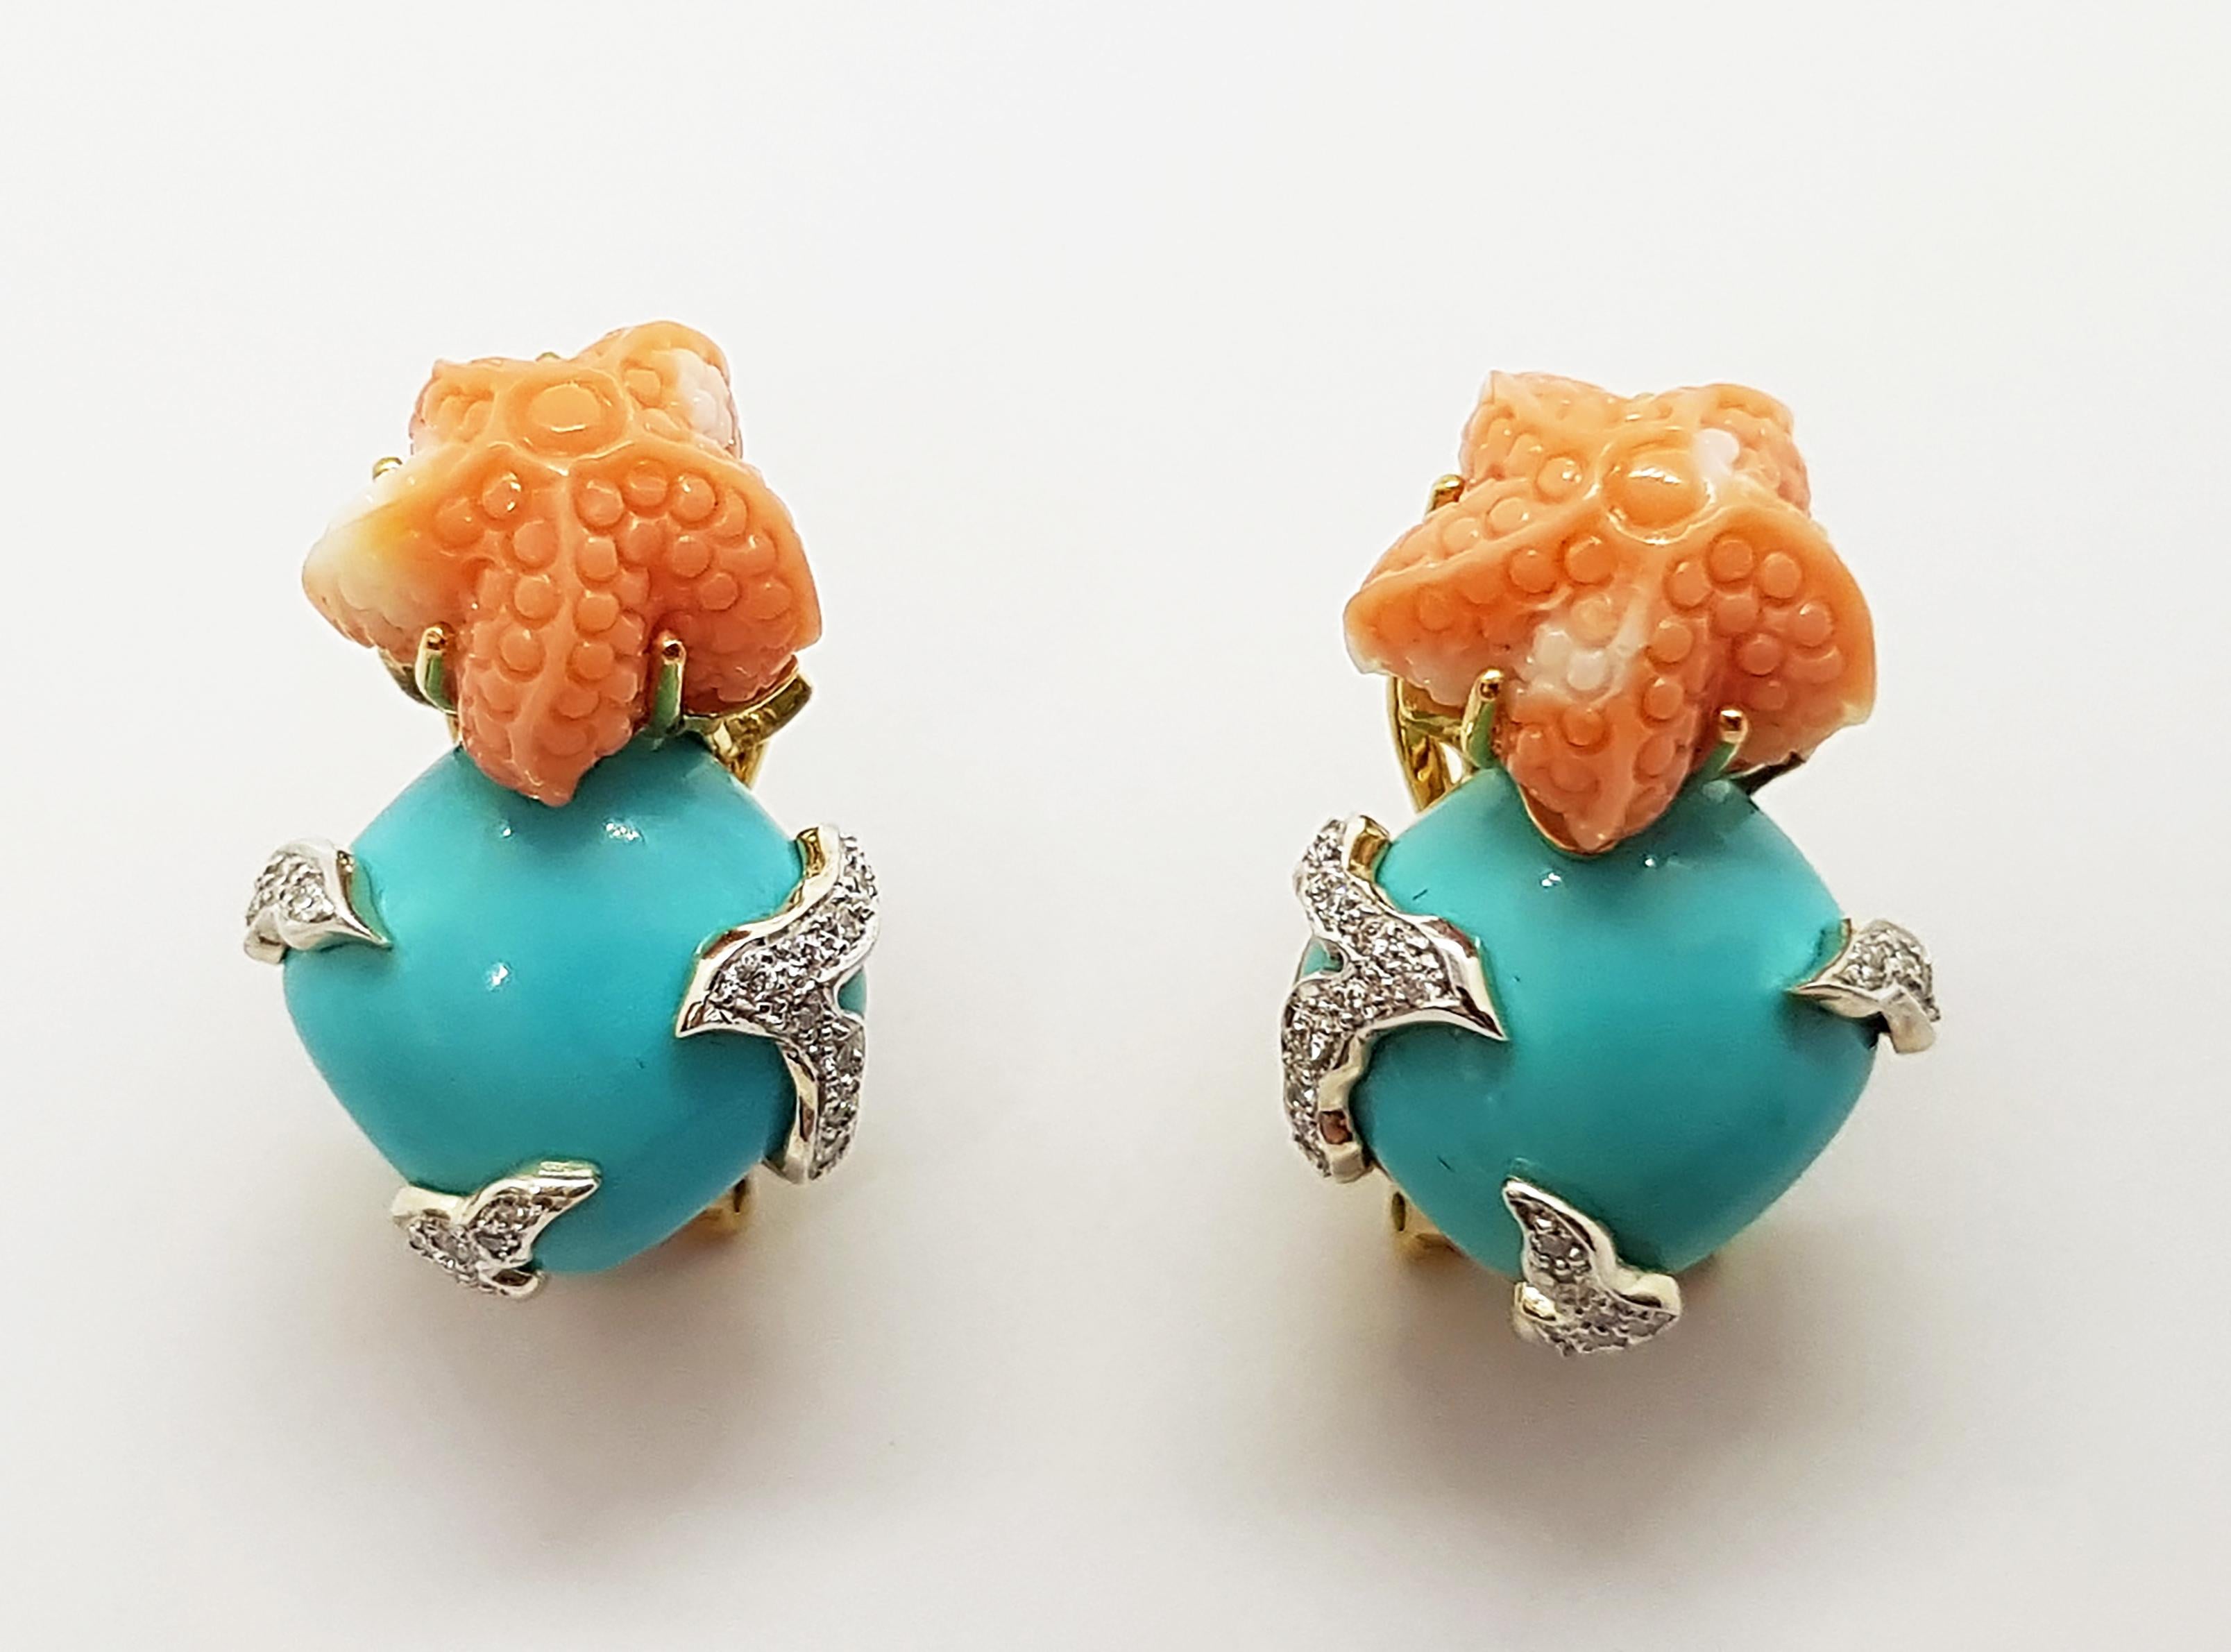 Turquoise, Coral with Diamond 0.2 carat Earrings set in 18 Karat Gold Settings

Width:  1.5 cm 
Length:  2.5 cm
Total Weight: 13.01 grams

FOUNDED BY AWARD-WINNING COUPLE, NUTTAPON (KENNY) & SHAR-LINN, KAVANT & SHARART IS A FINE JEWELRY BRAND